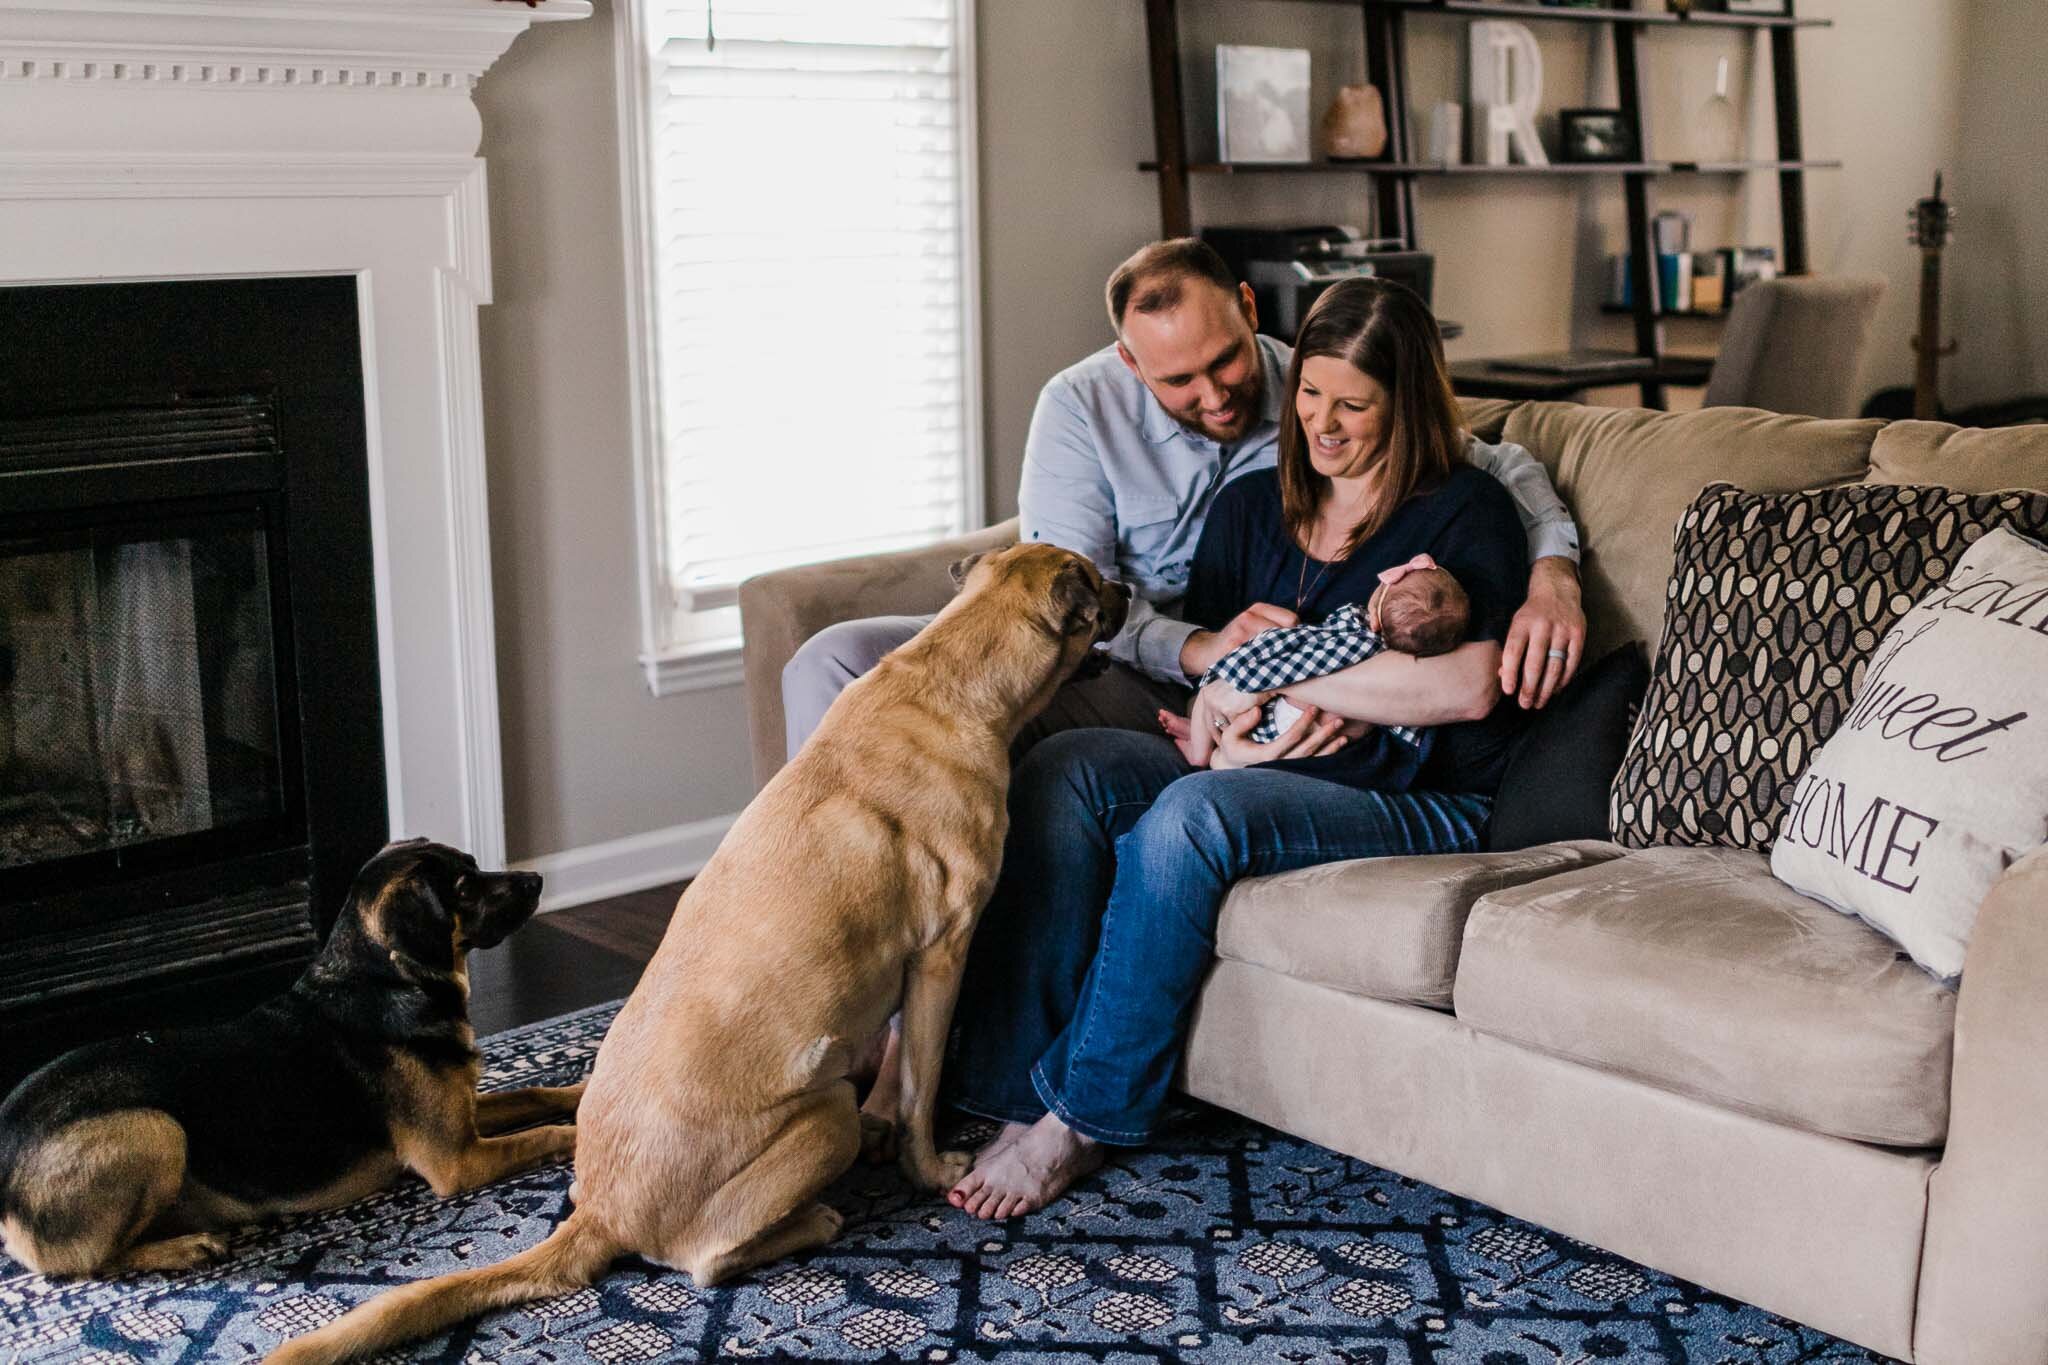 Raleigh Newborn Photographer | By G. Lin Photography | Lifestyle Newborn Session at Home 